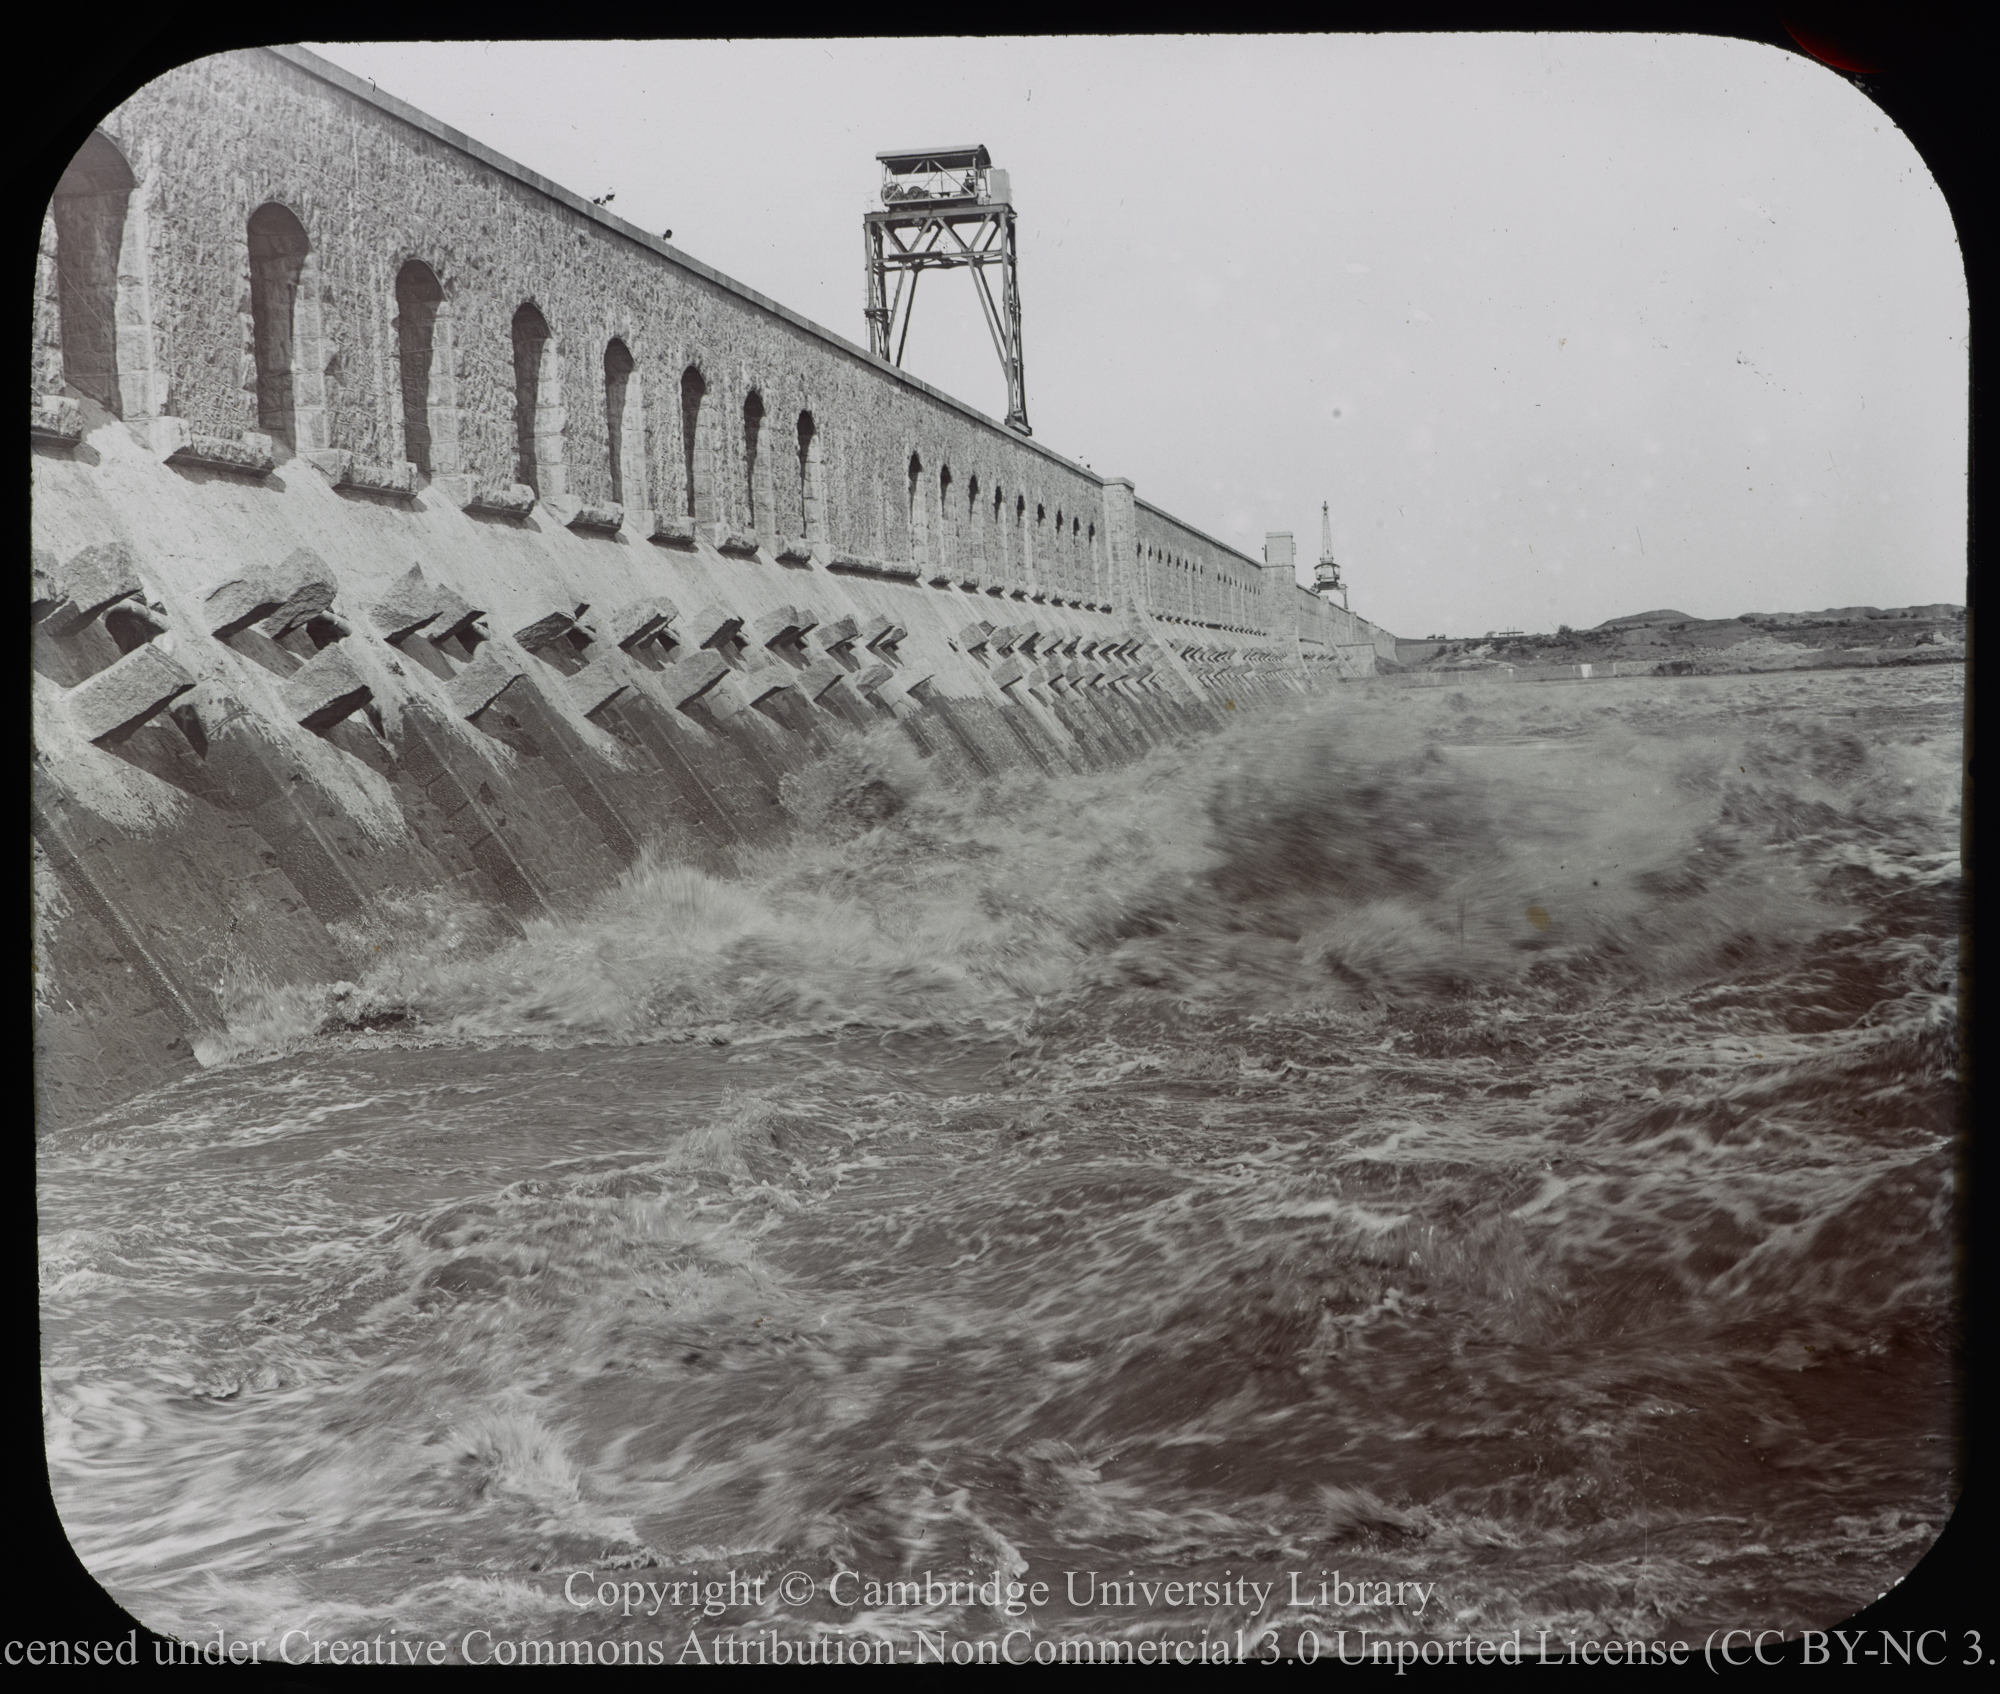 Dam on the Nile River, 1935